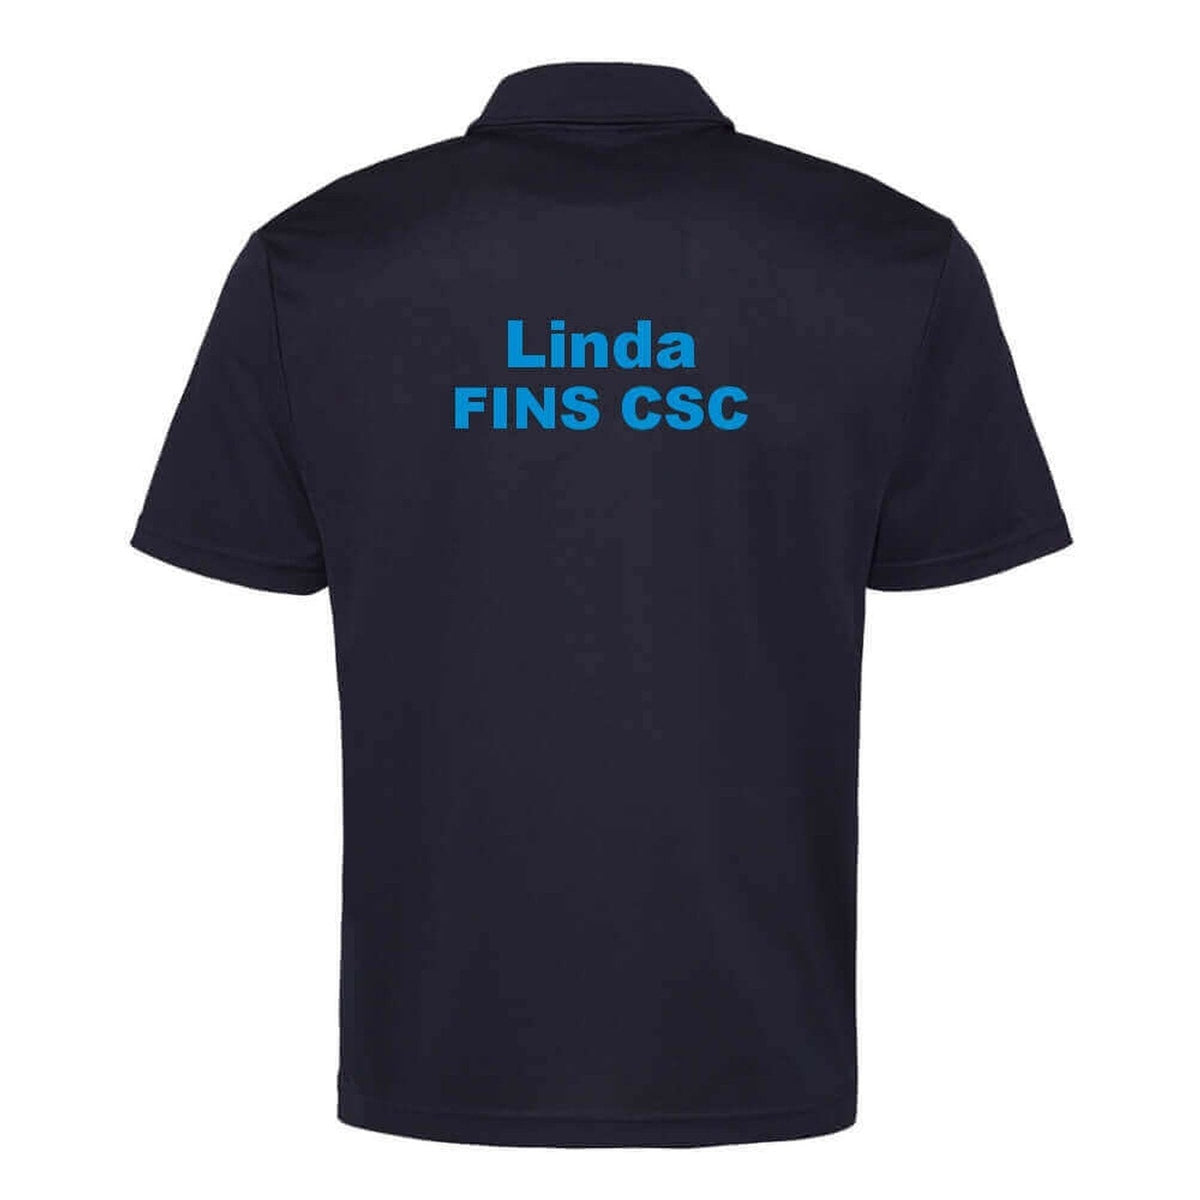 Fins CSC - Polo Adults